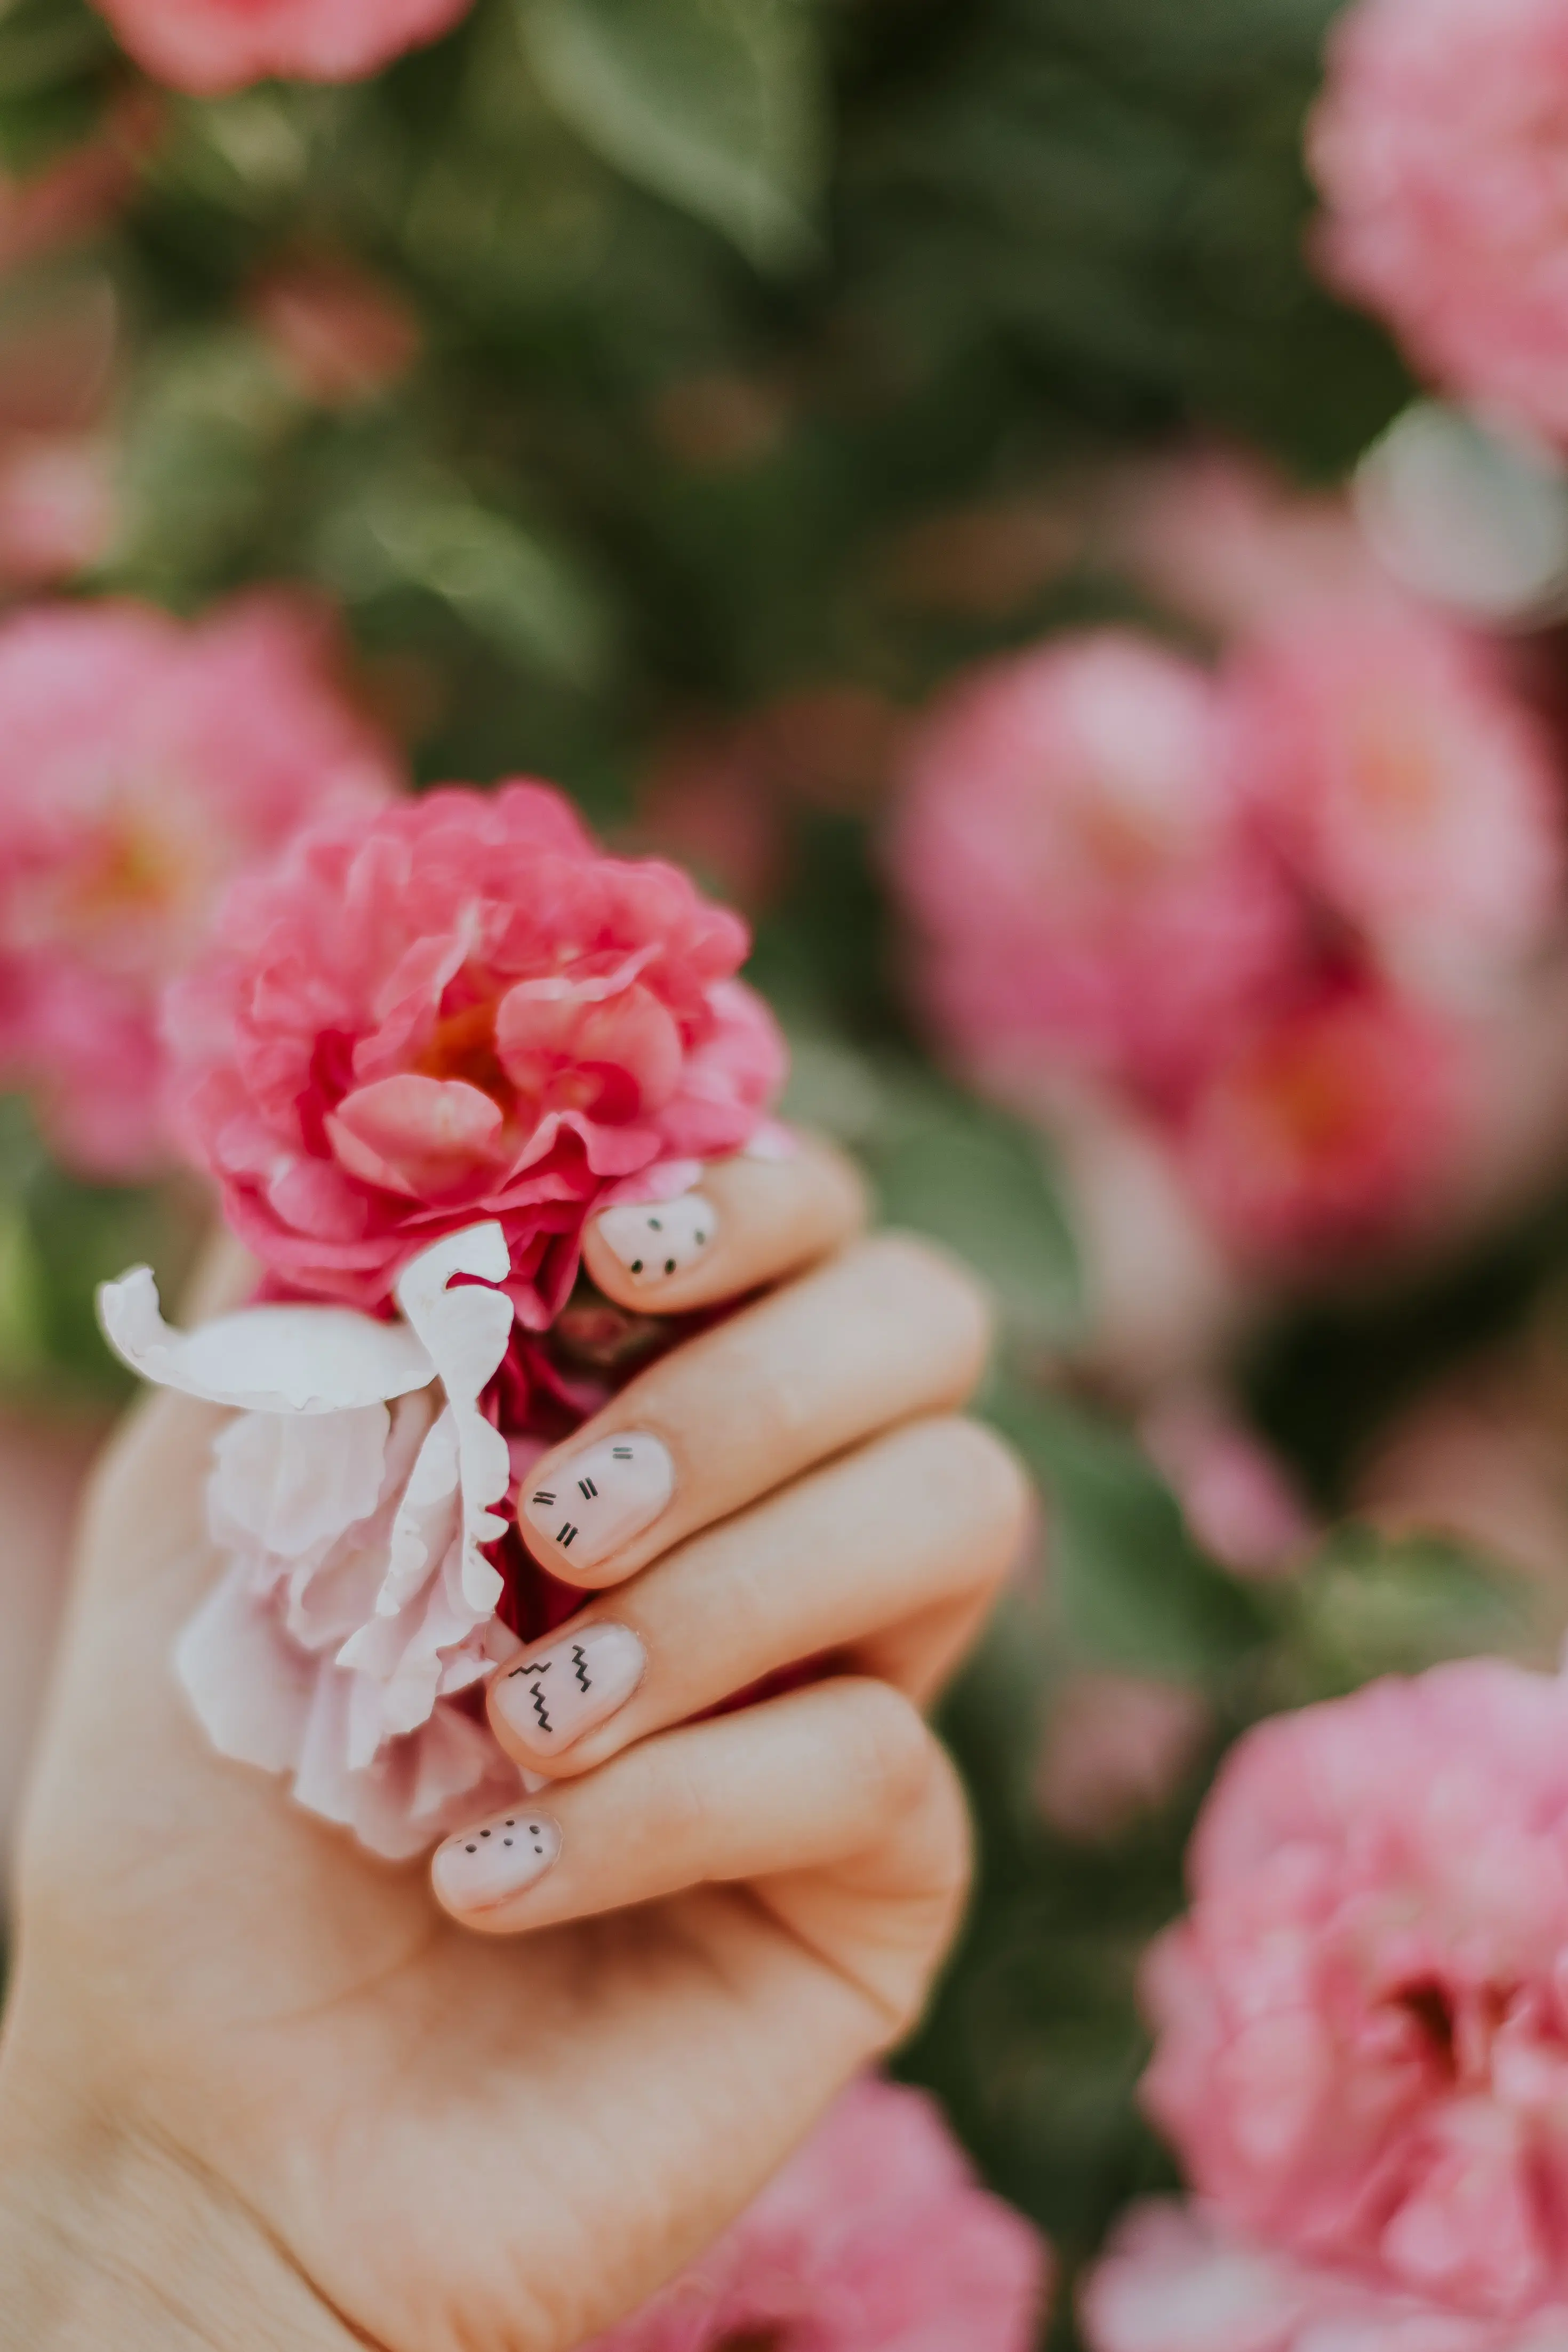 flower in hand with painted nails